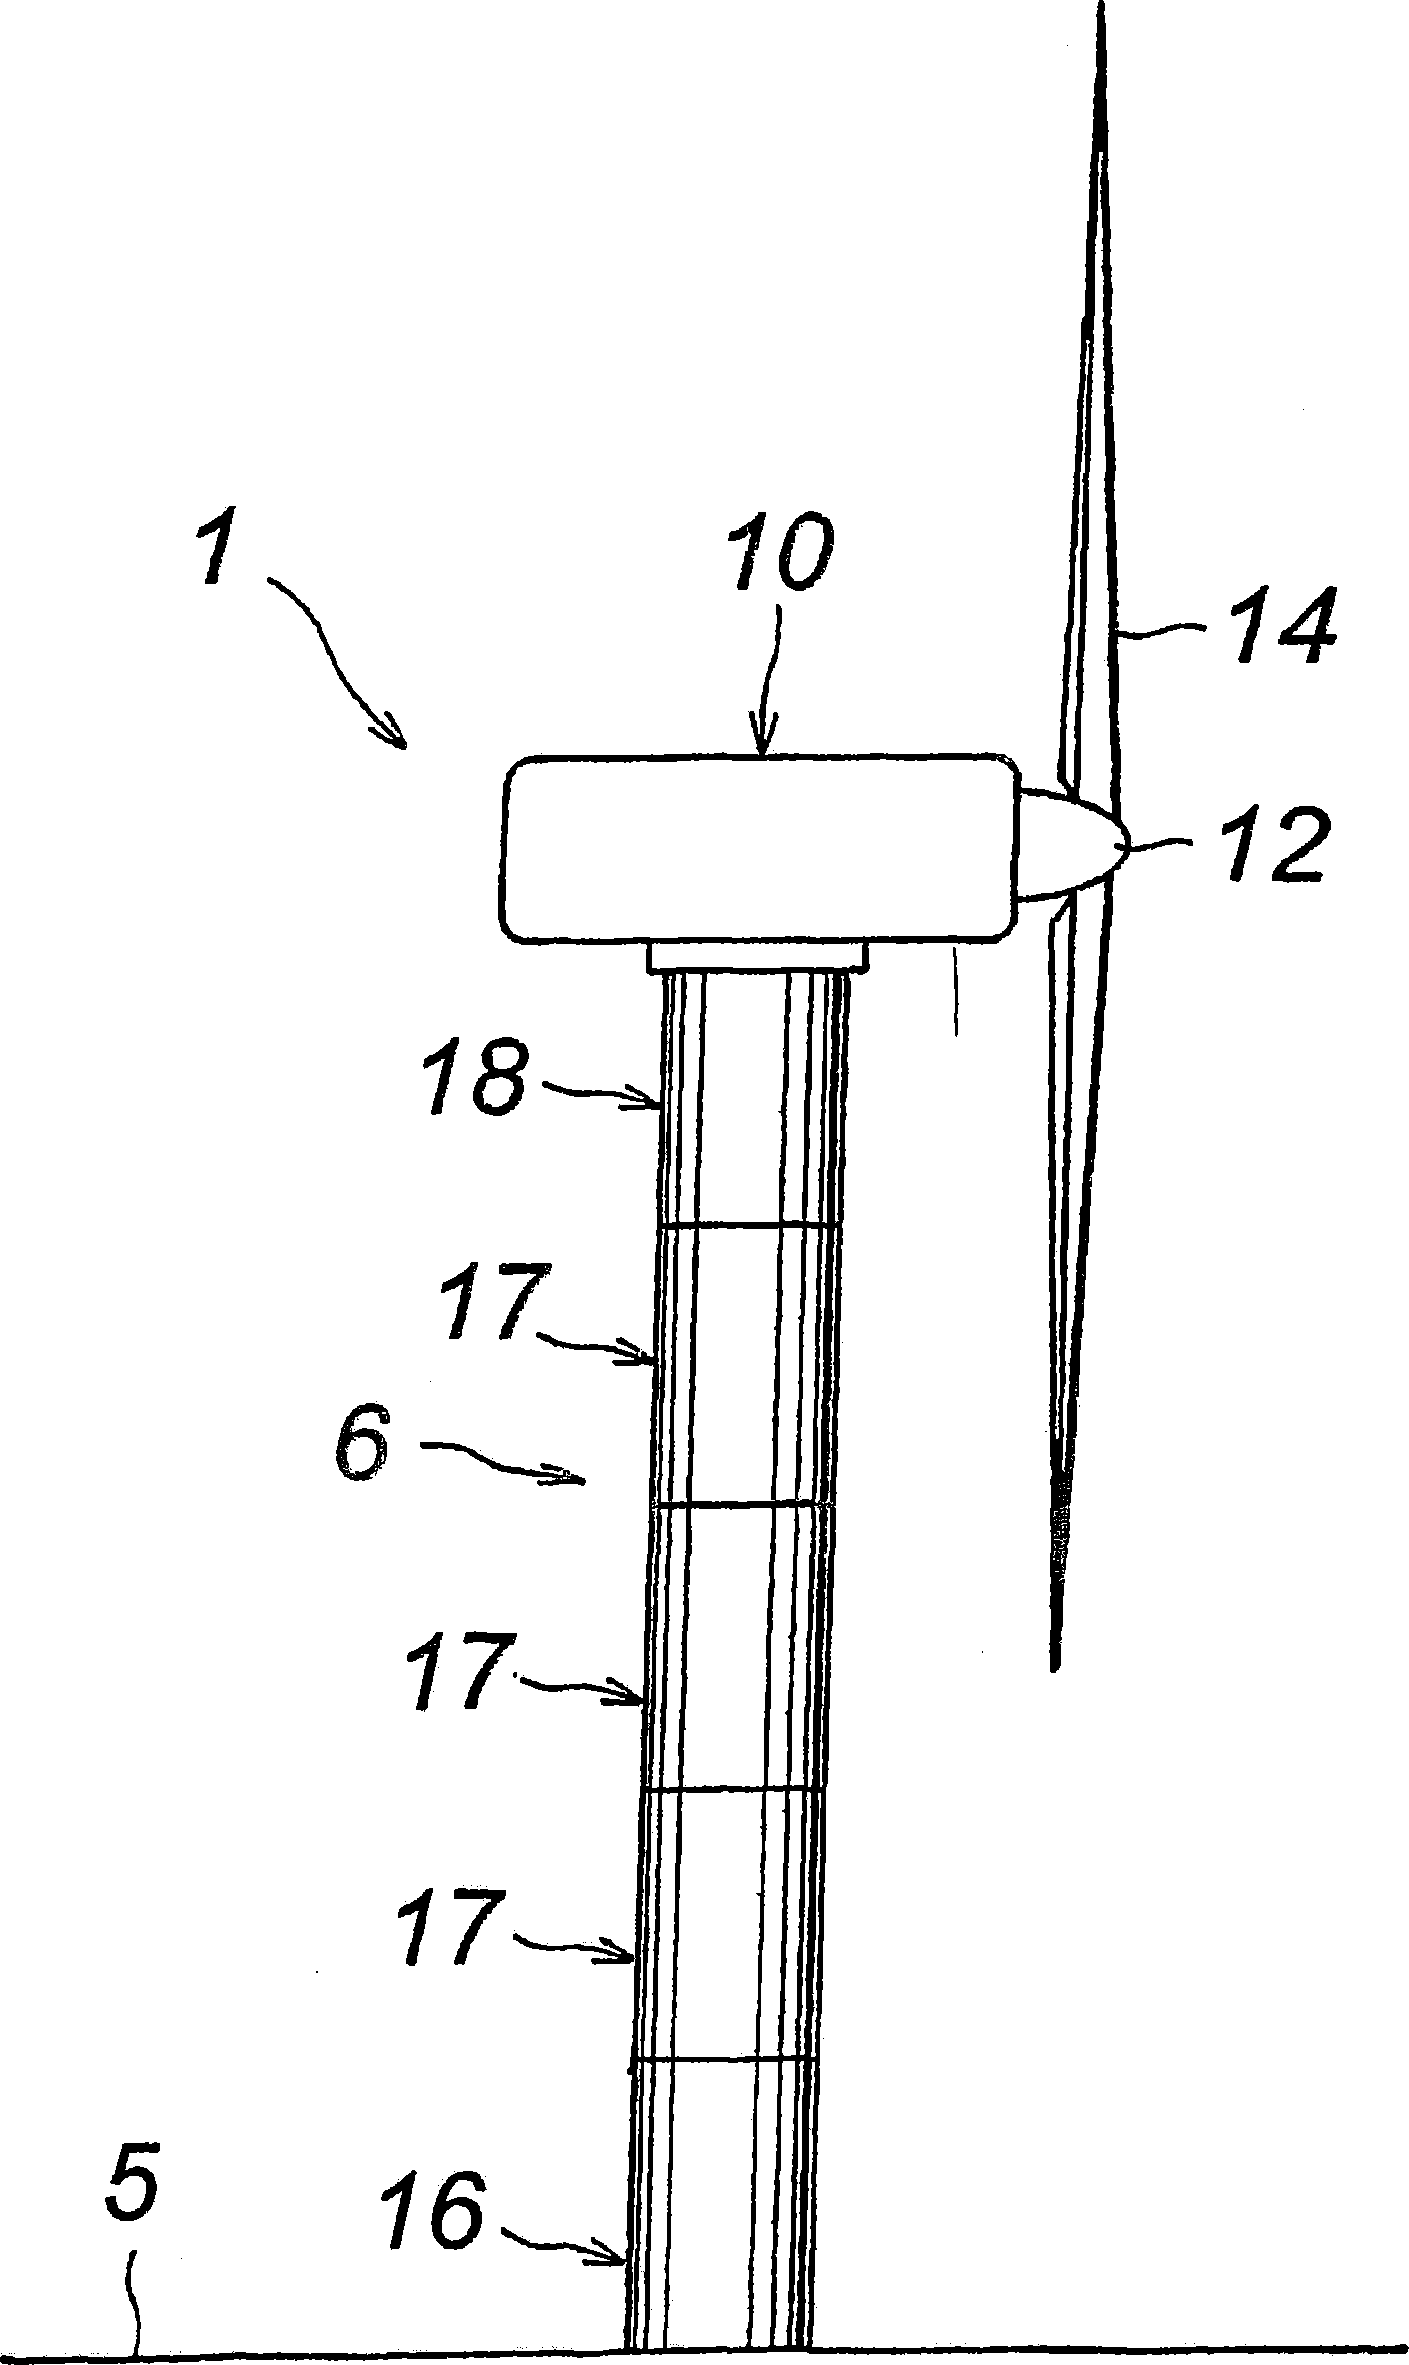 System and process for transporting wind turbines